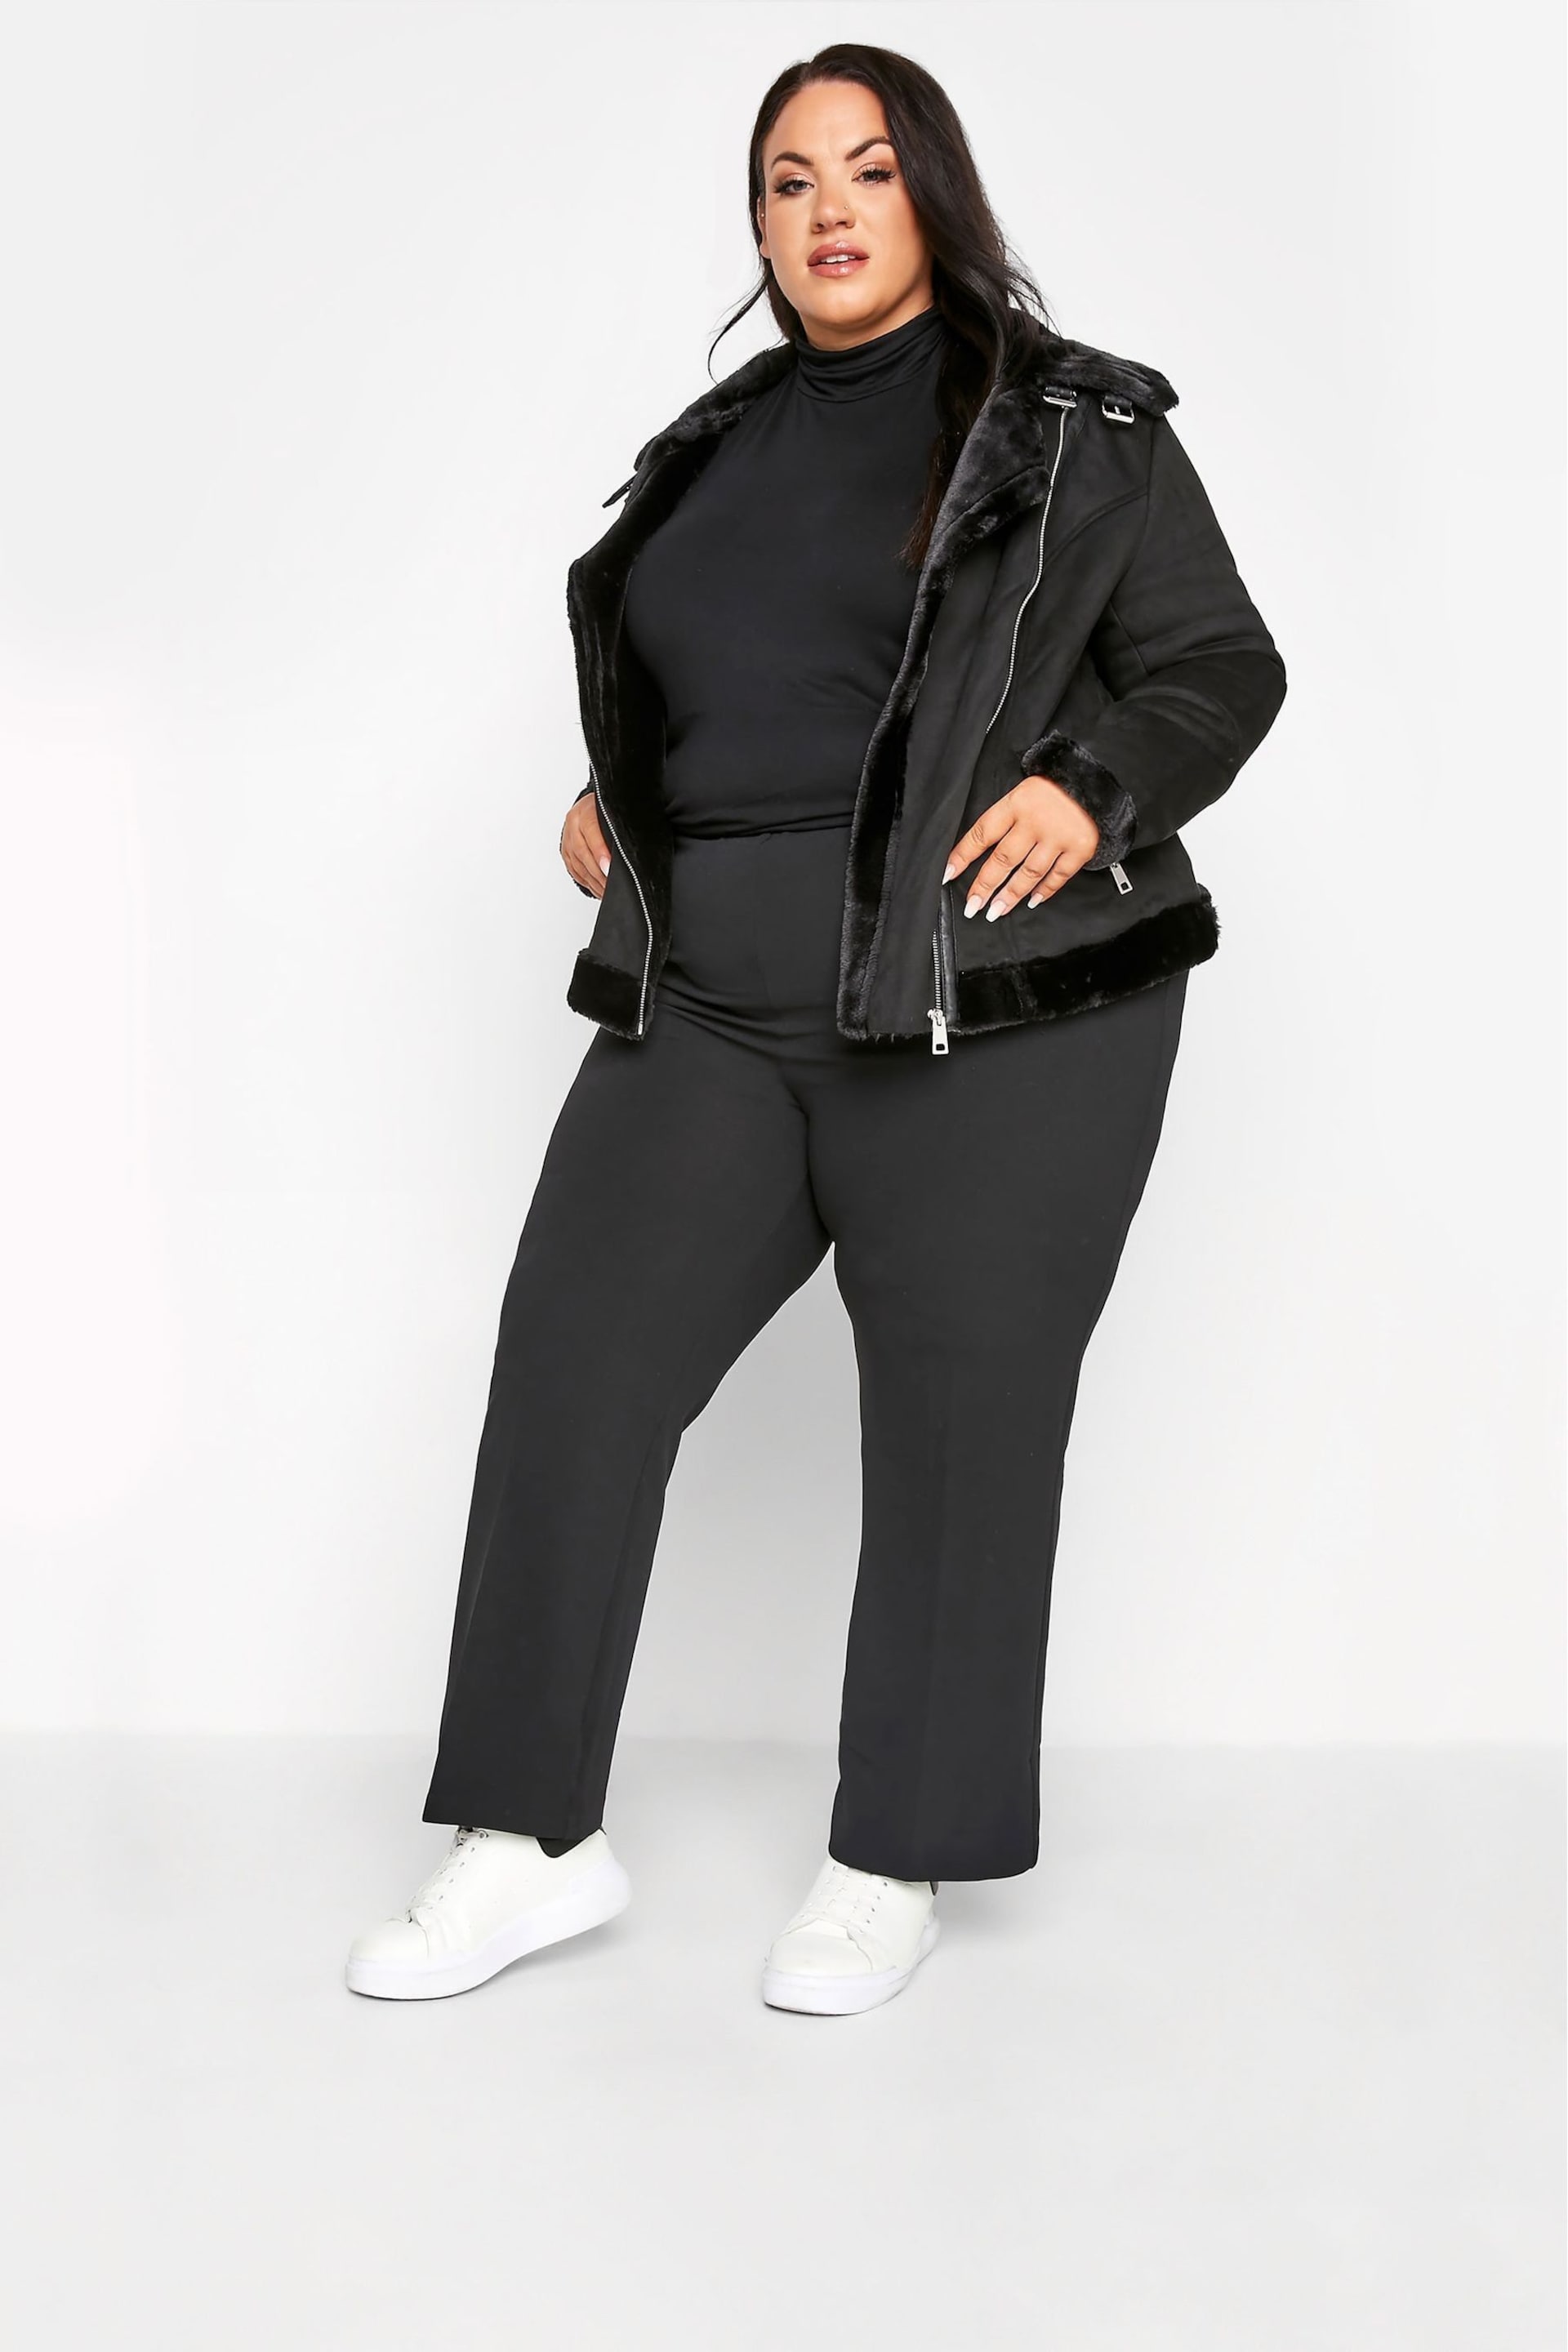 Yours Curve Black Bootcut Ponte Rib Trousers - Image 5 of 7